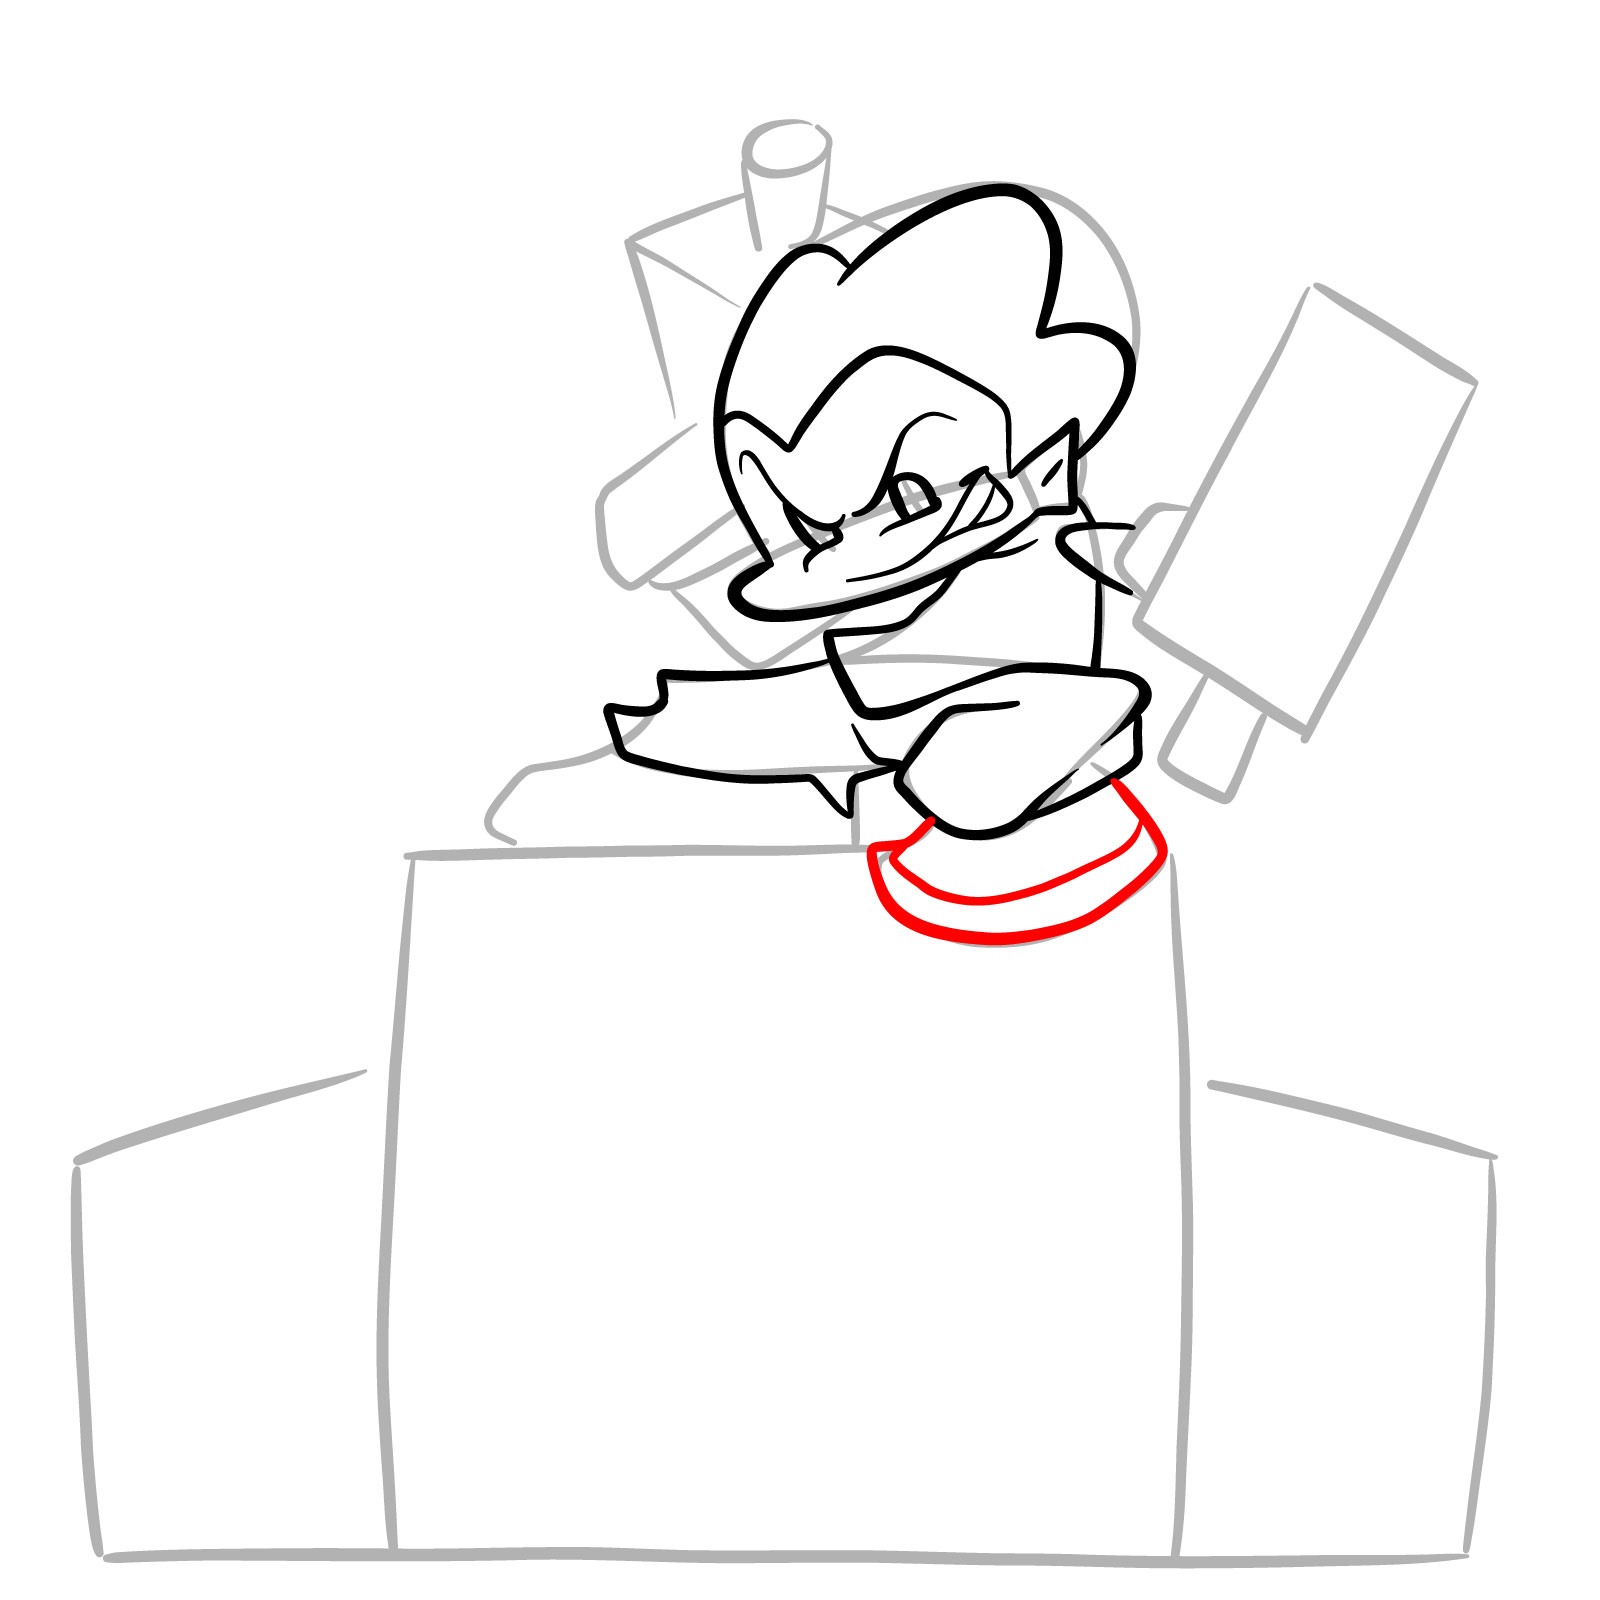 How to draw Pico on the speakers - step 14